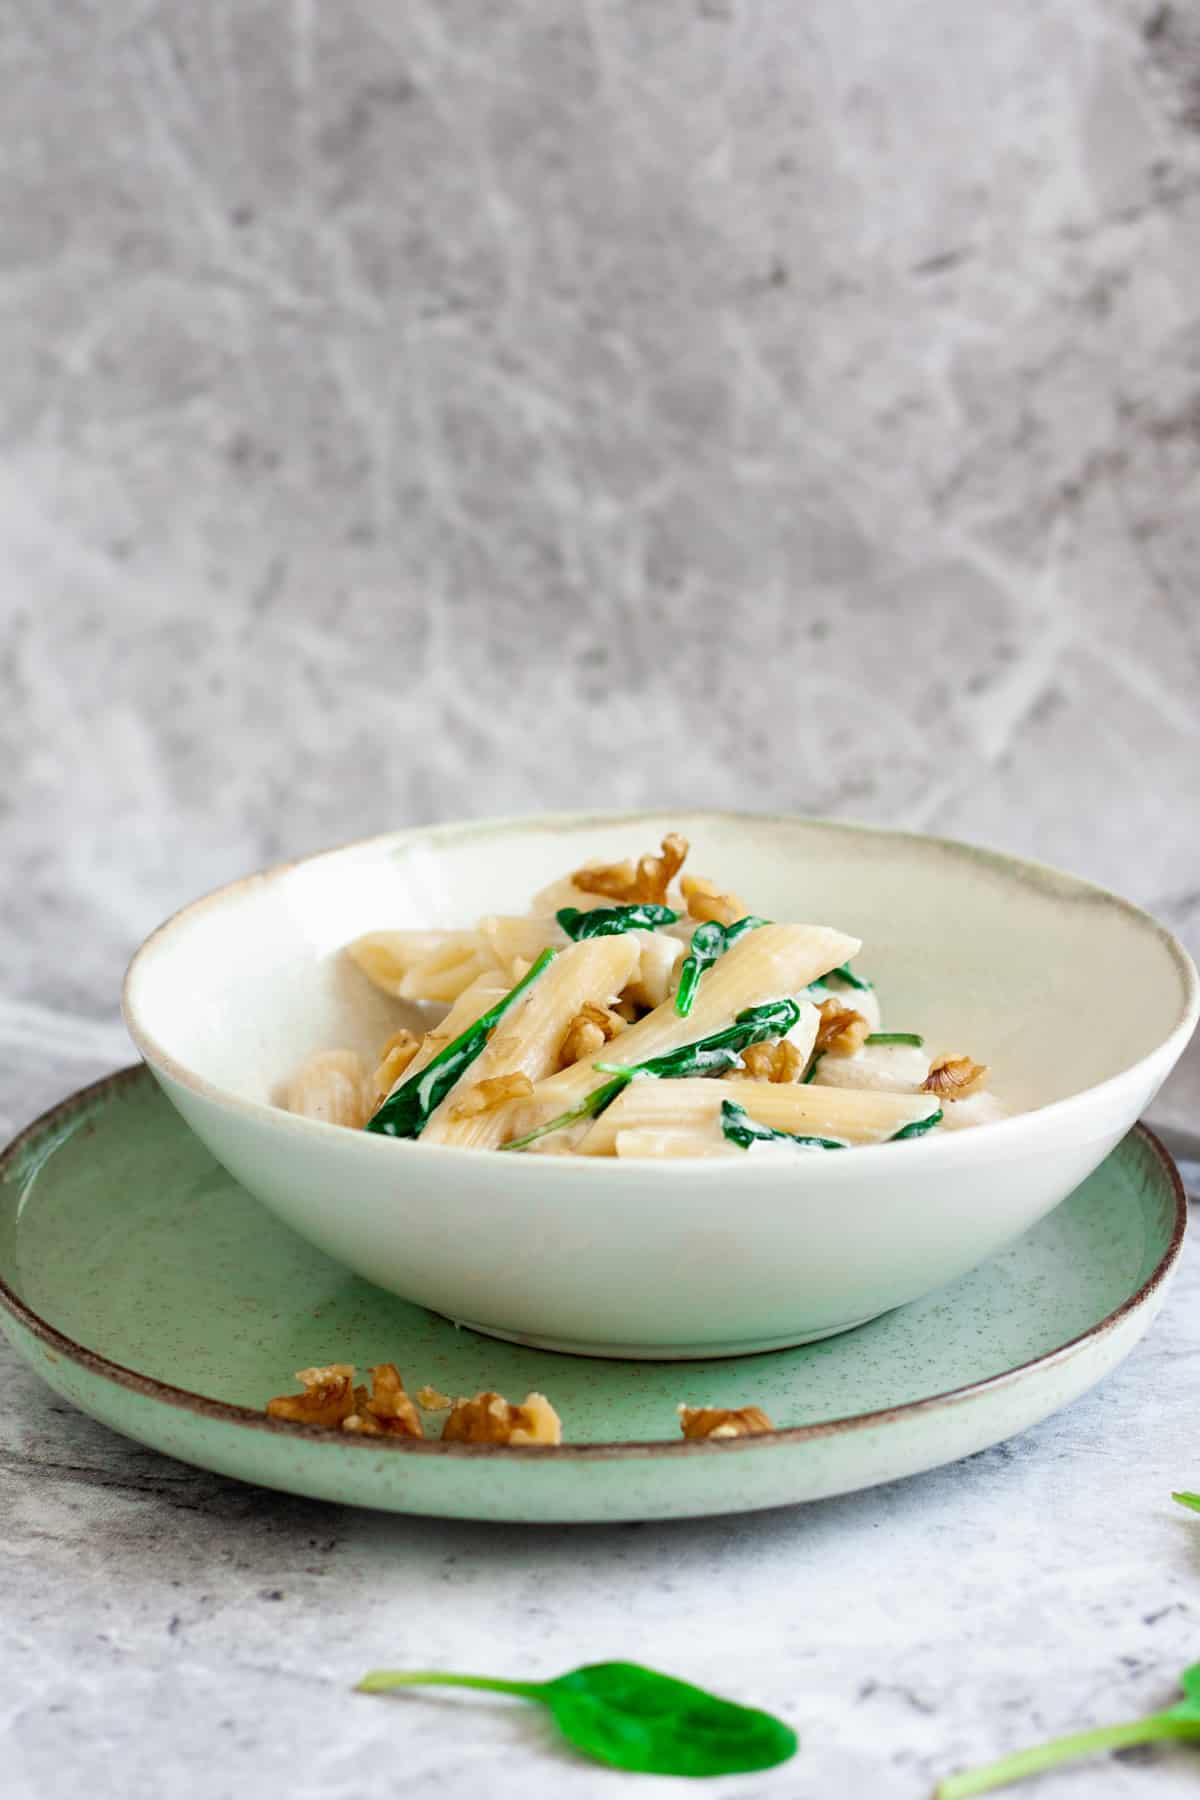 plate of creamy spinach and walnut pasta